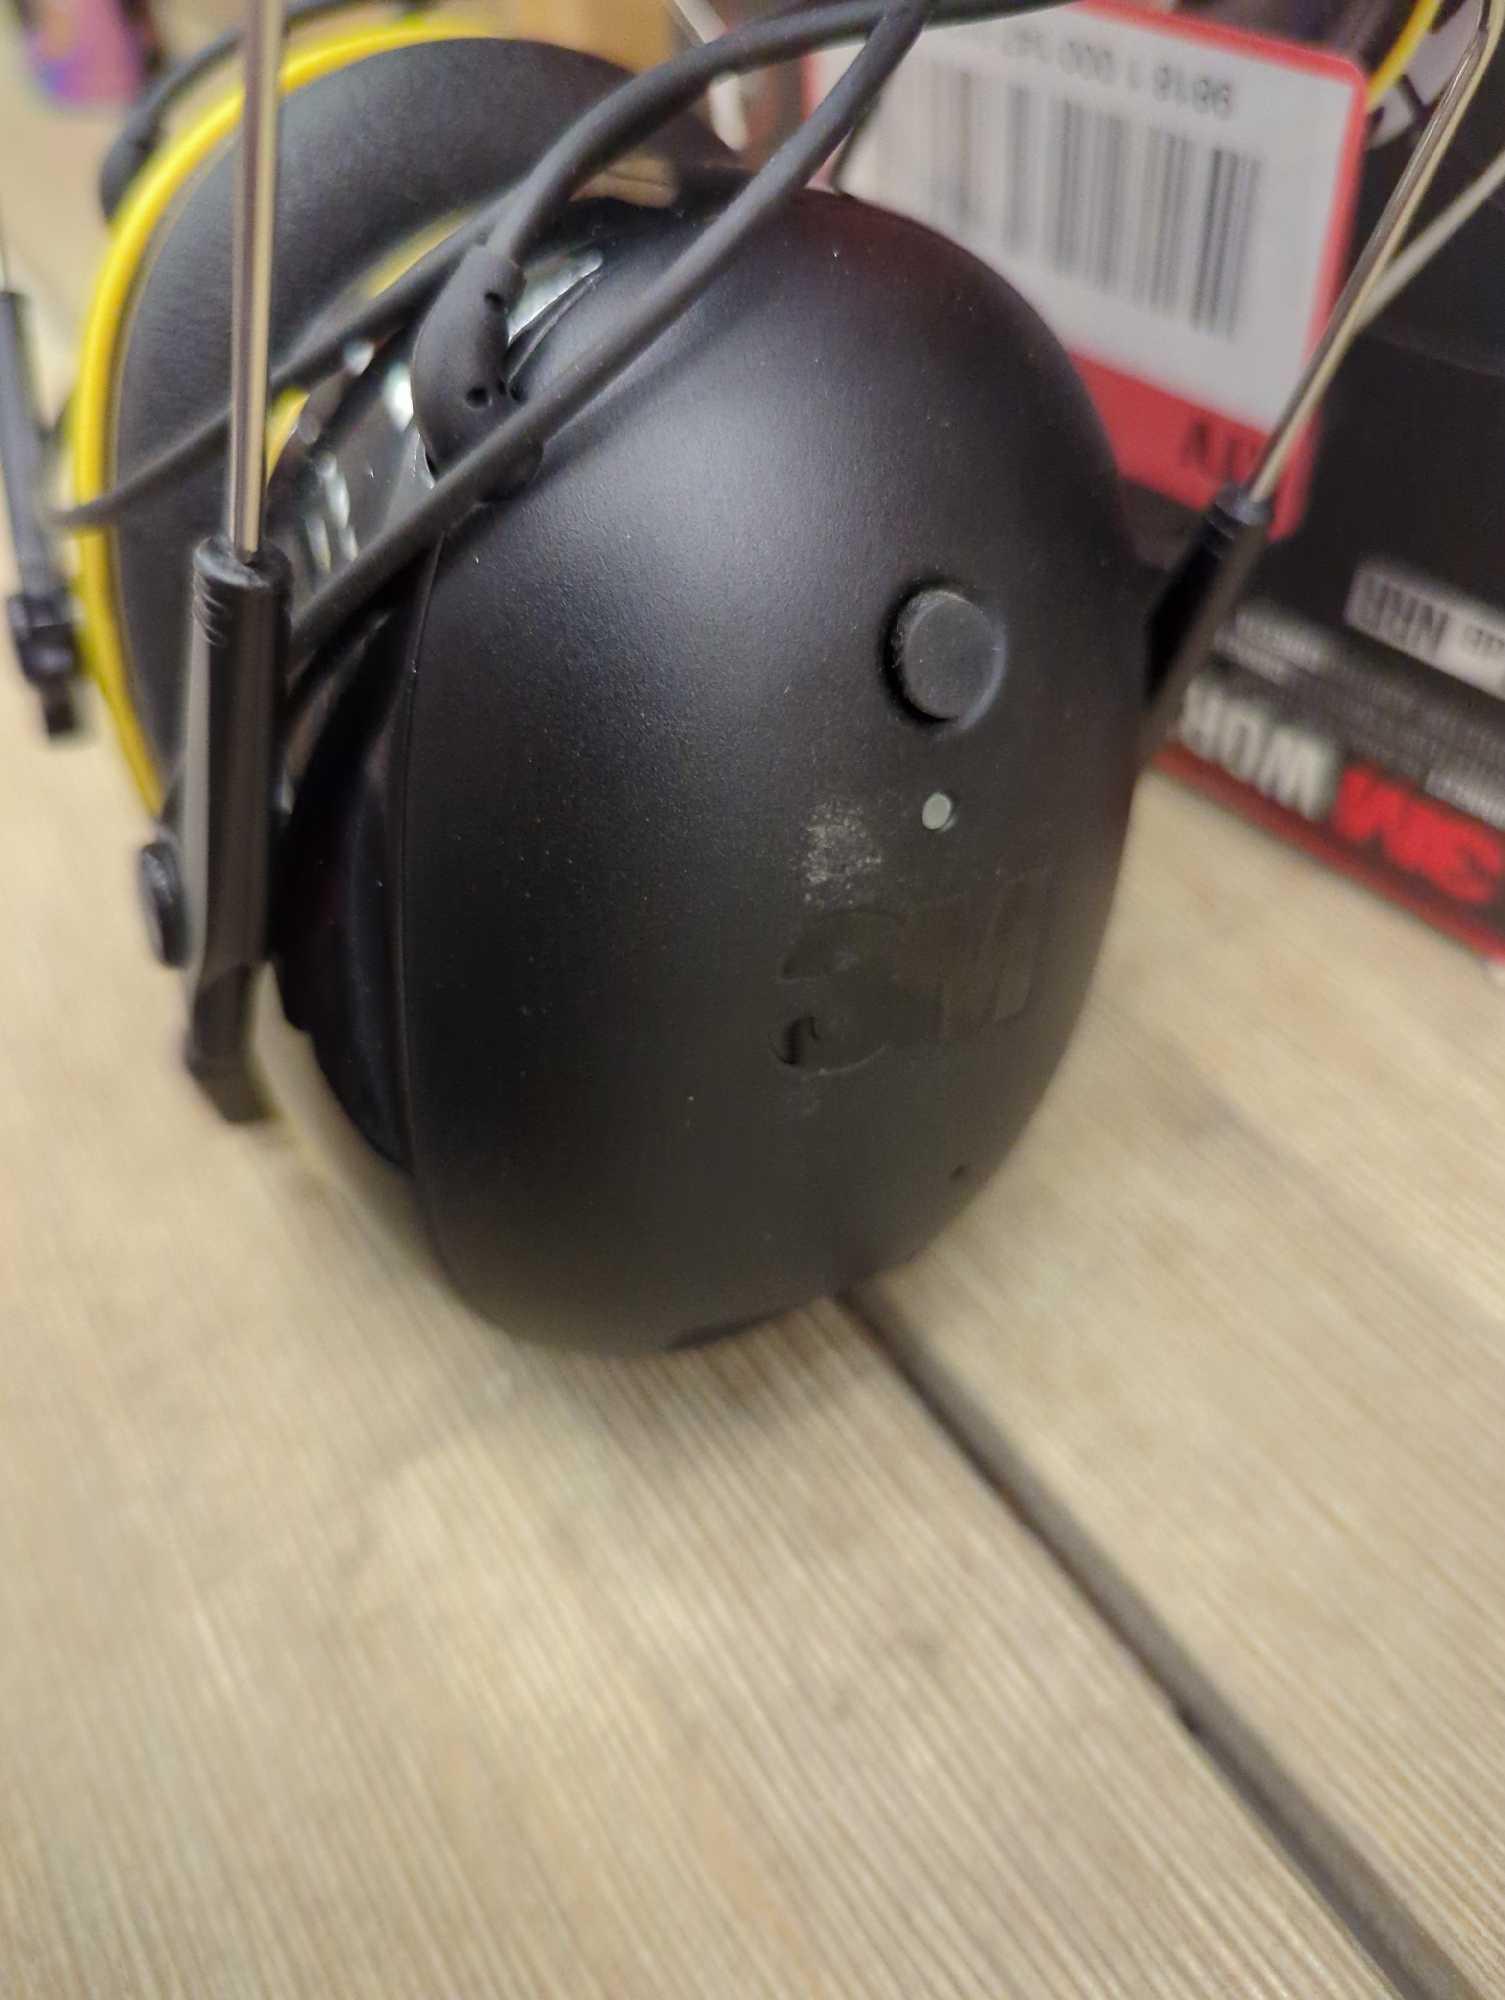 3M WorkTunes Connect Hearing Protector with Bluetooth Technology, Appears to be Used in Open Box